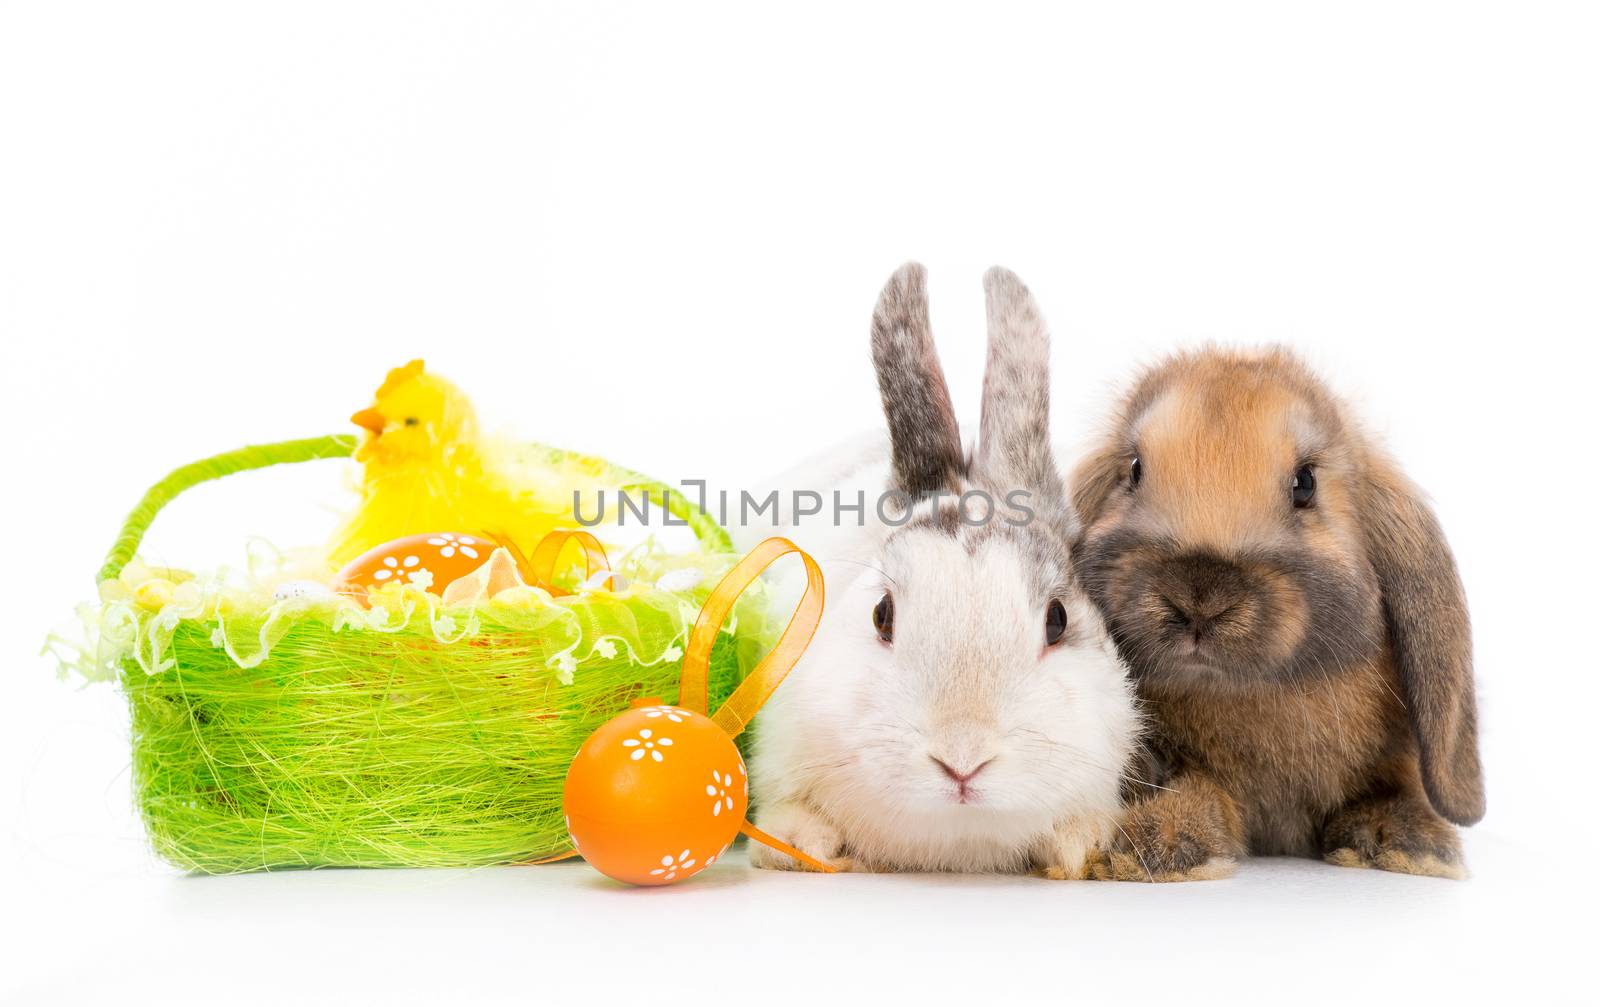 two rabbits and basket of Easter eggs on a white background